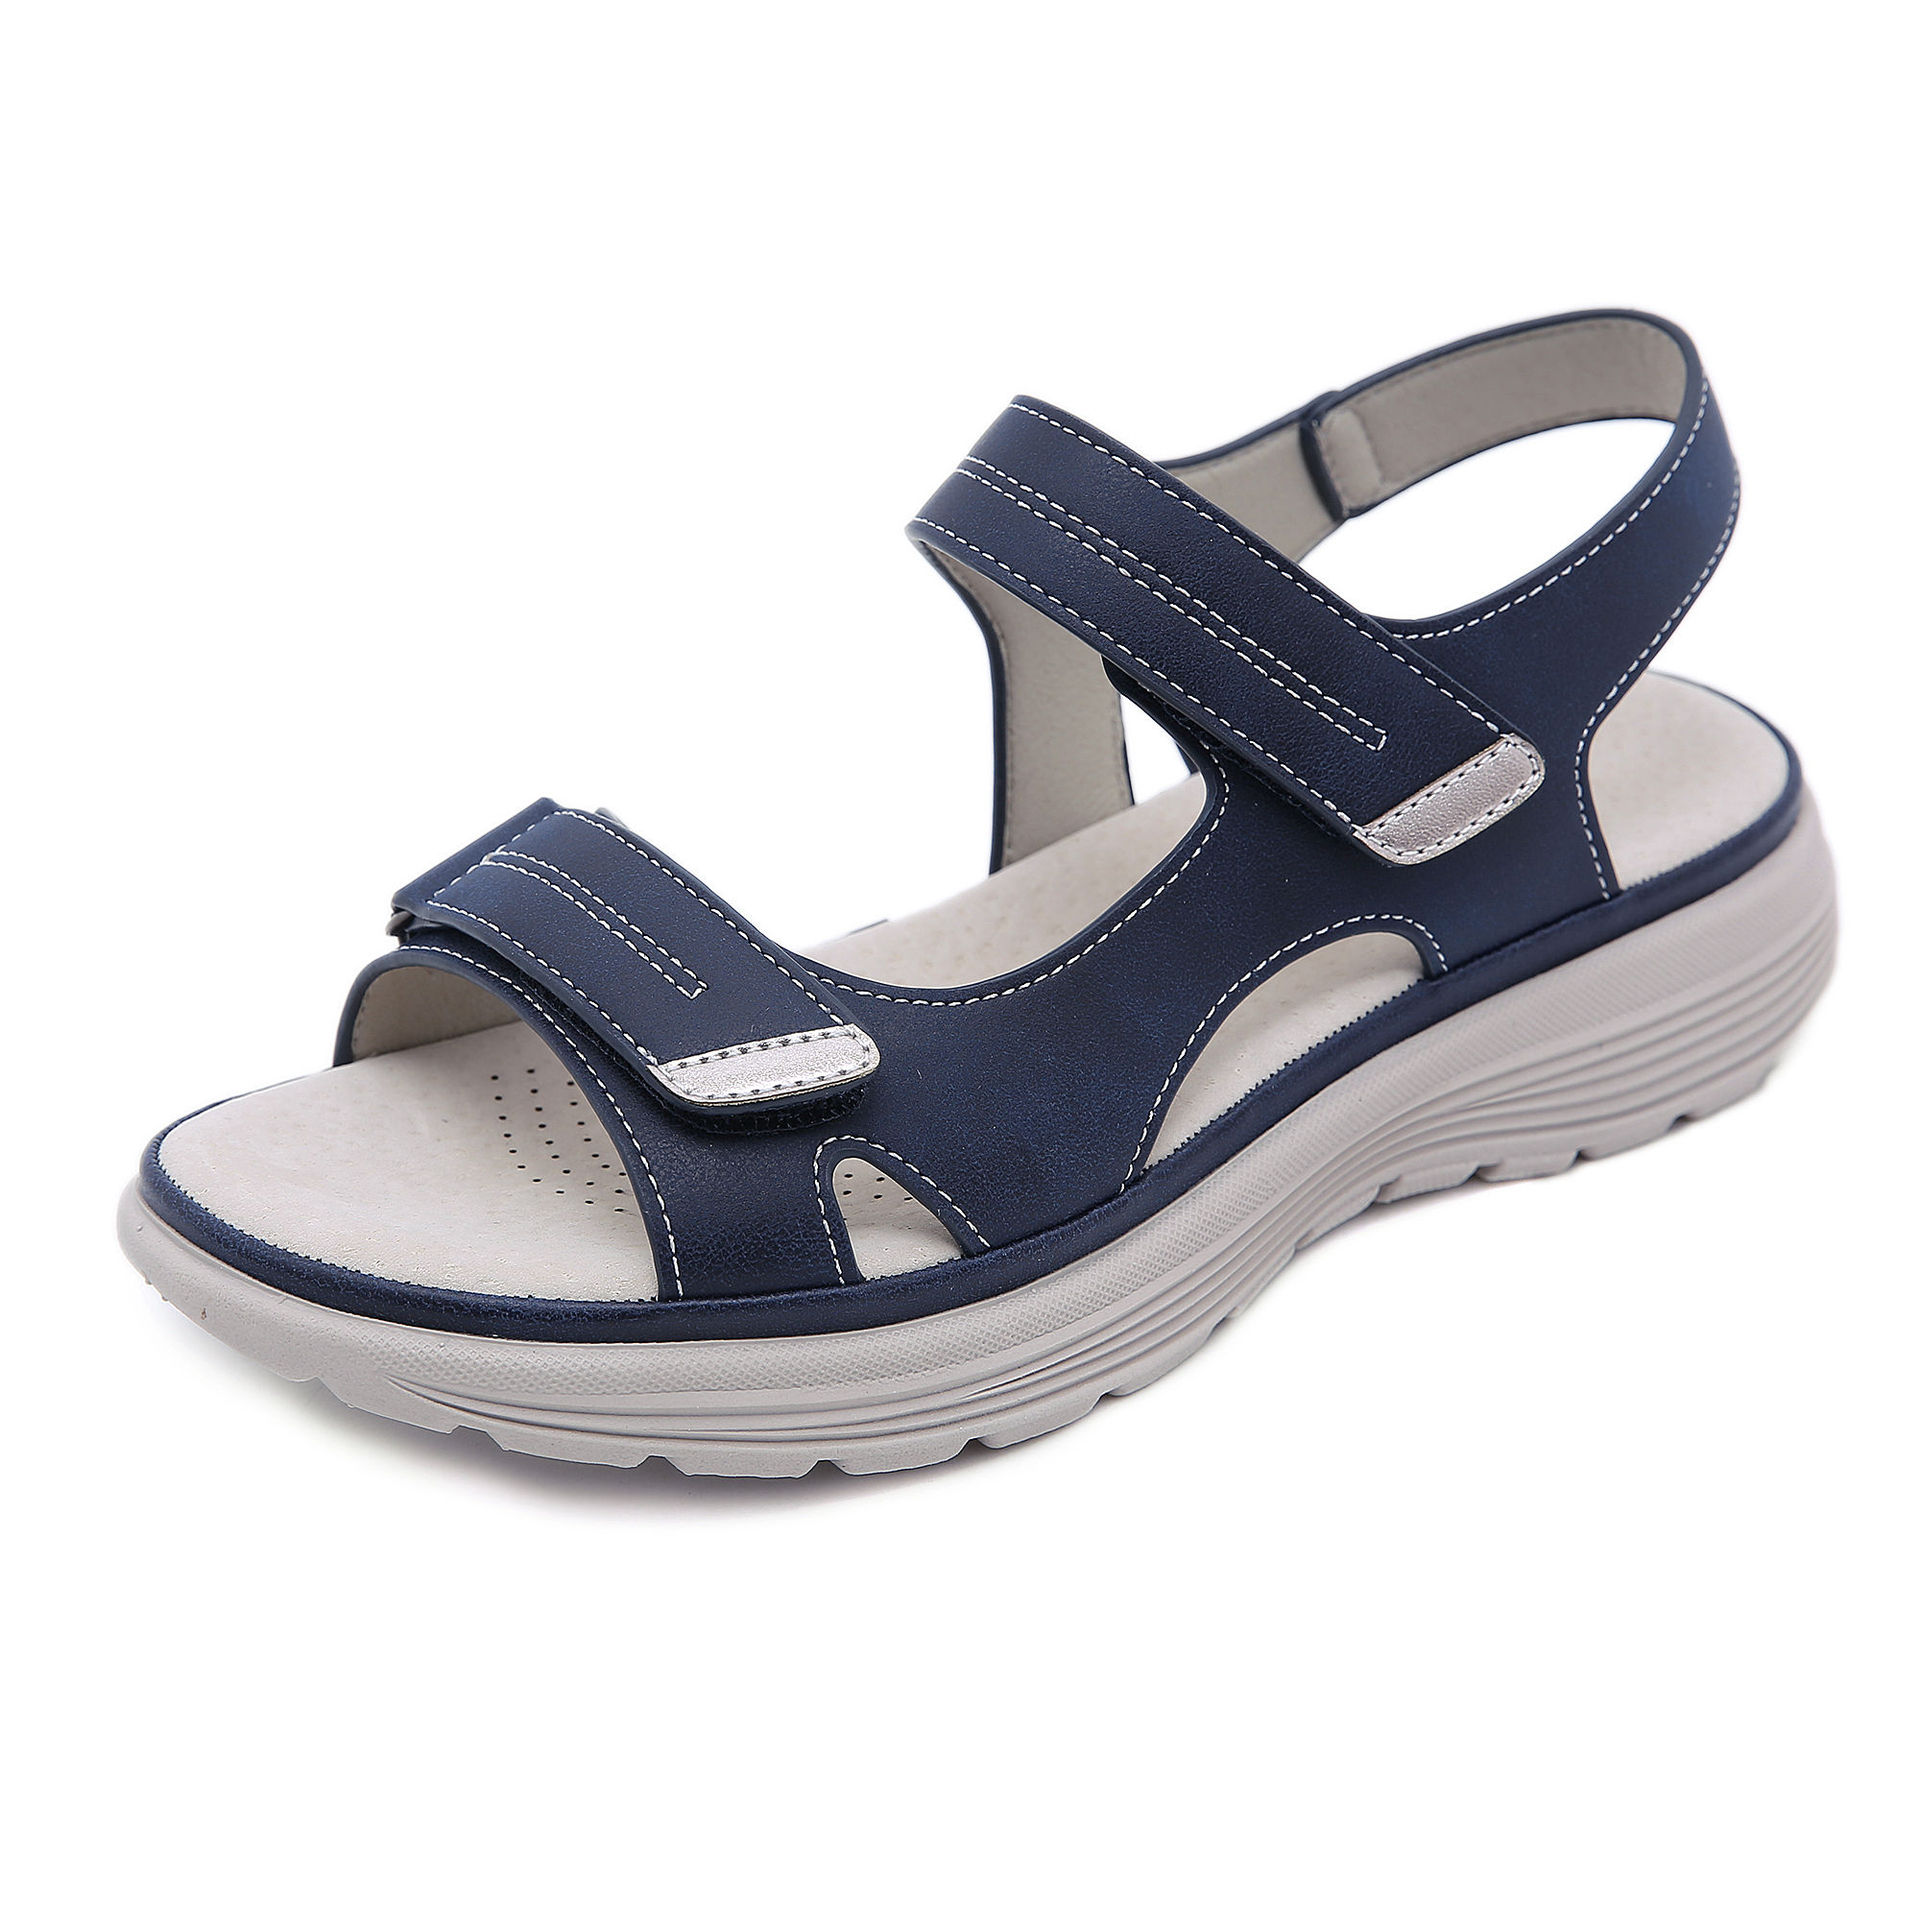 Women's Orthotic Sandals For Bunions